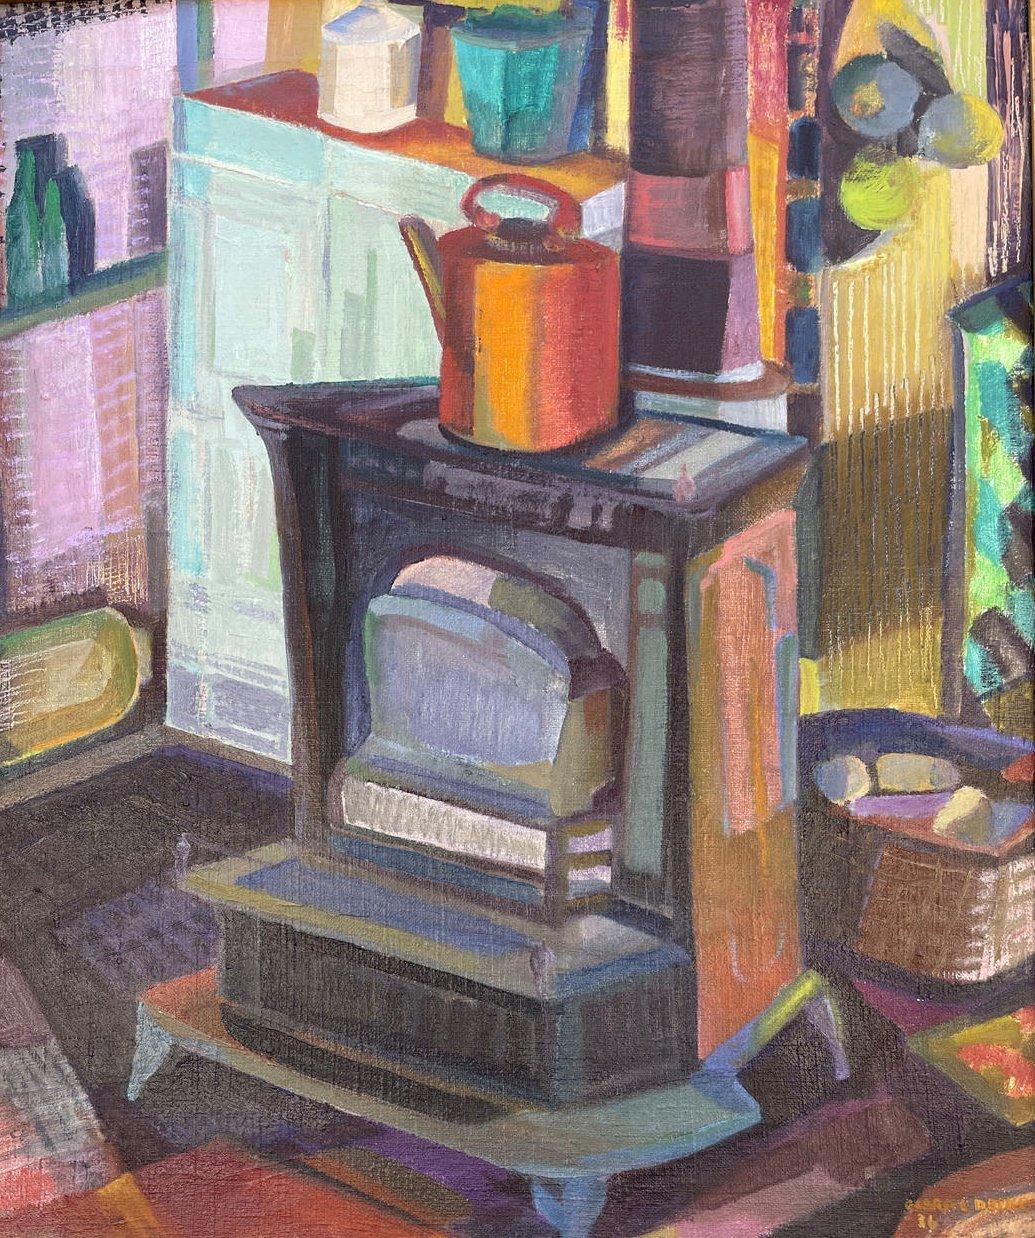 Studio Stove, Colorful Cubist Oil painting, Cleveland School female artist - Painting by Clara Deike